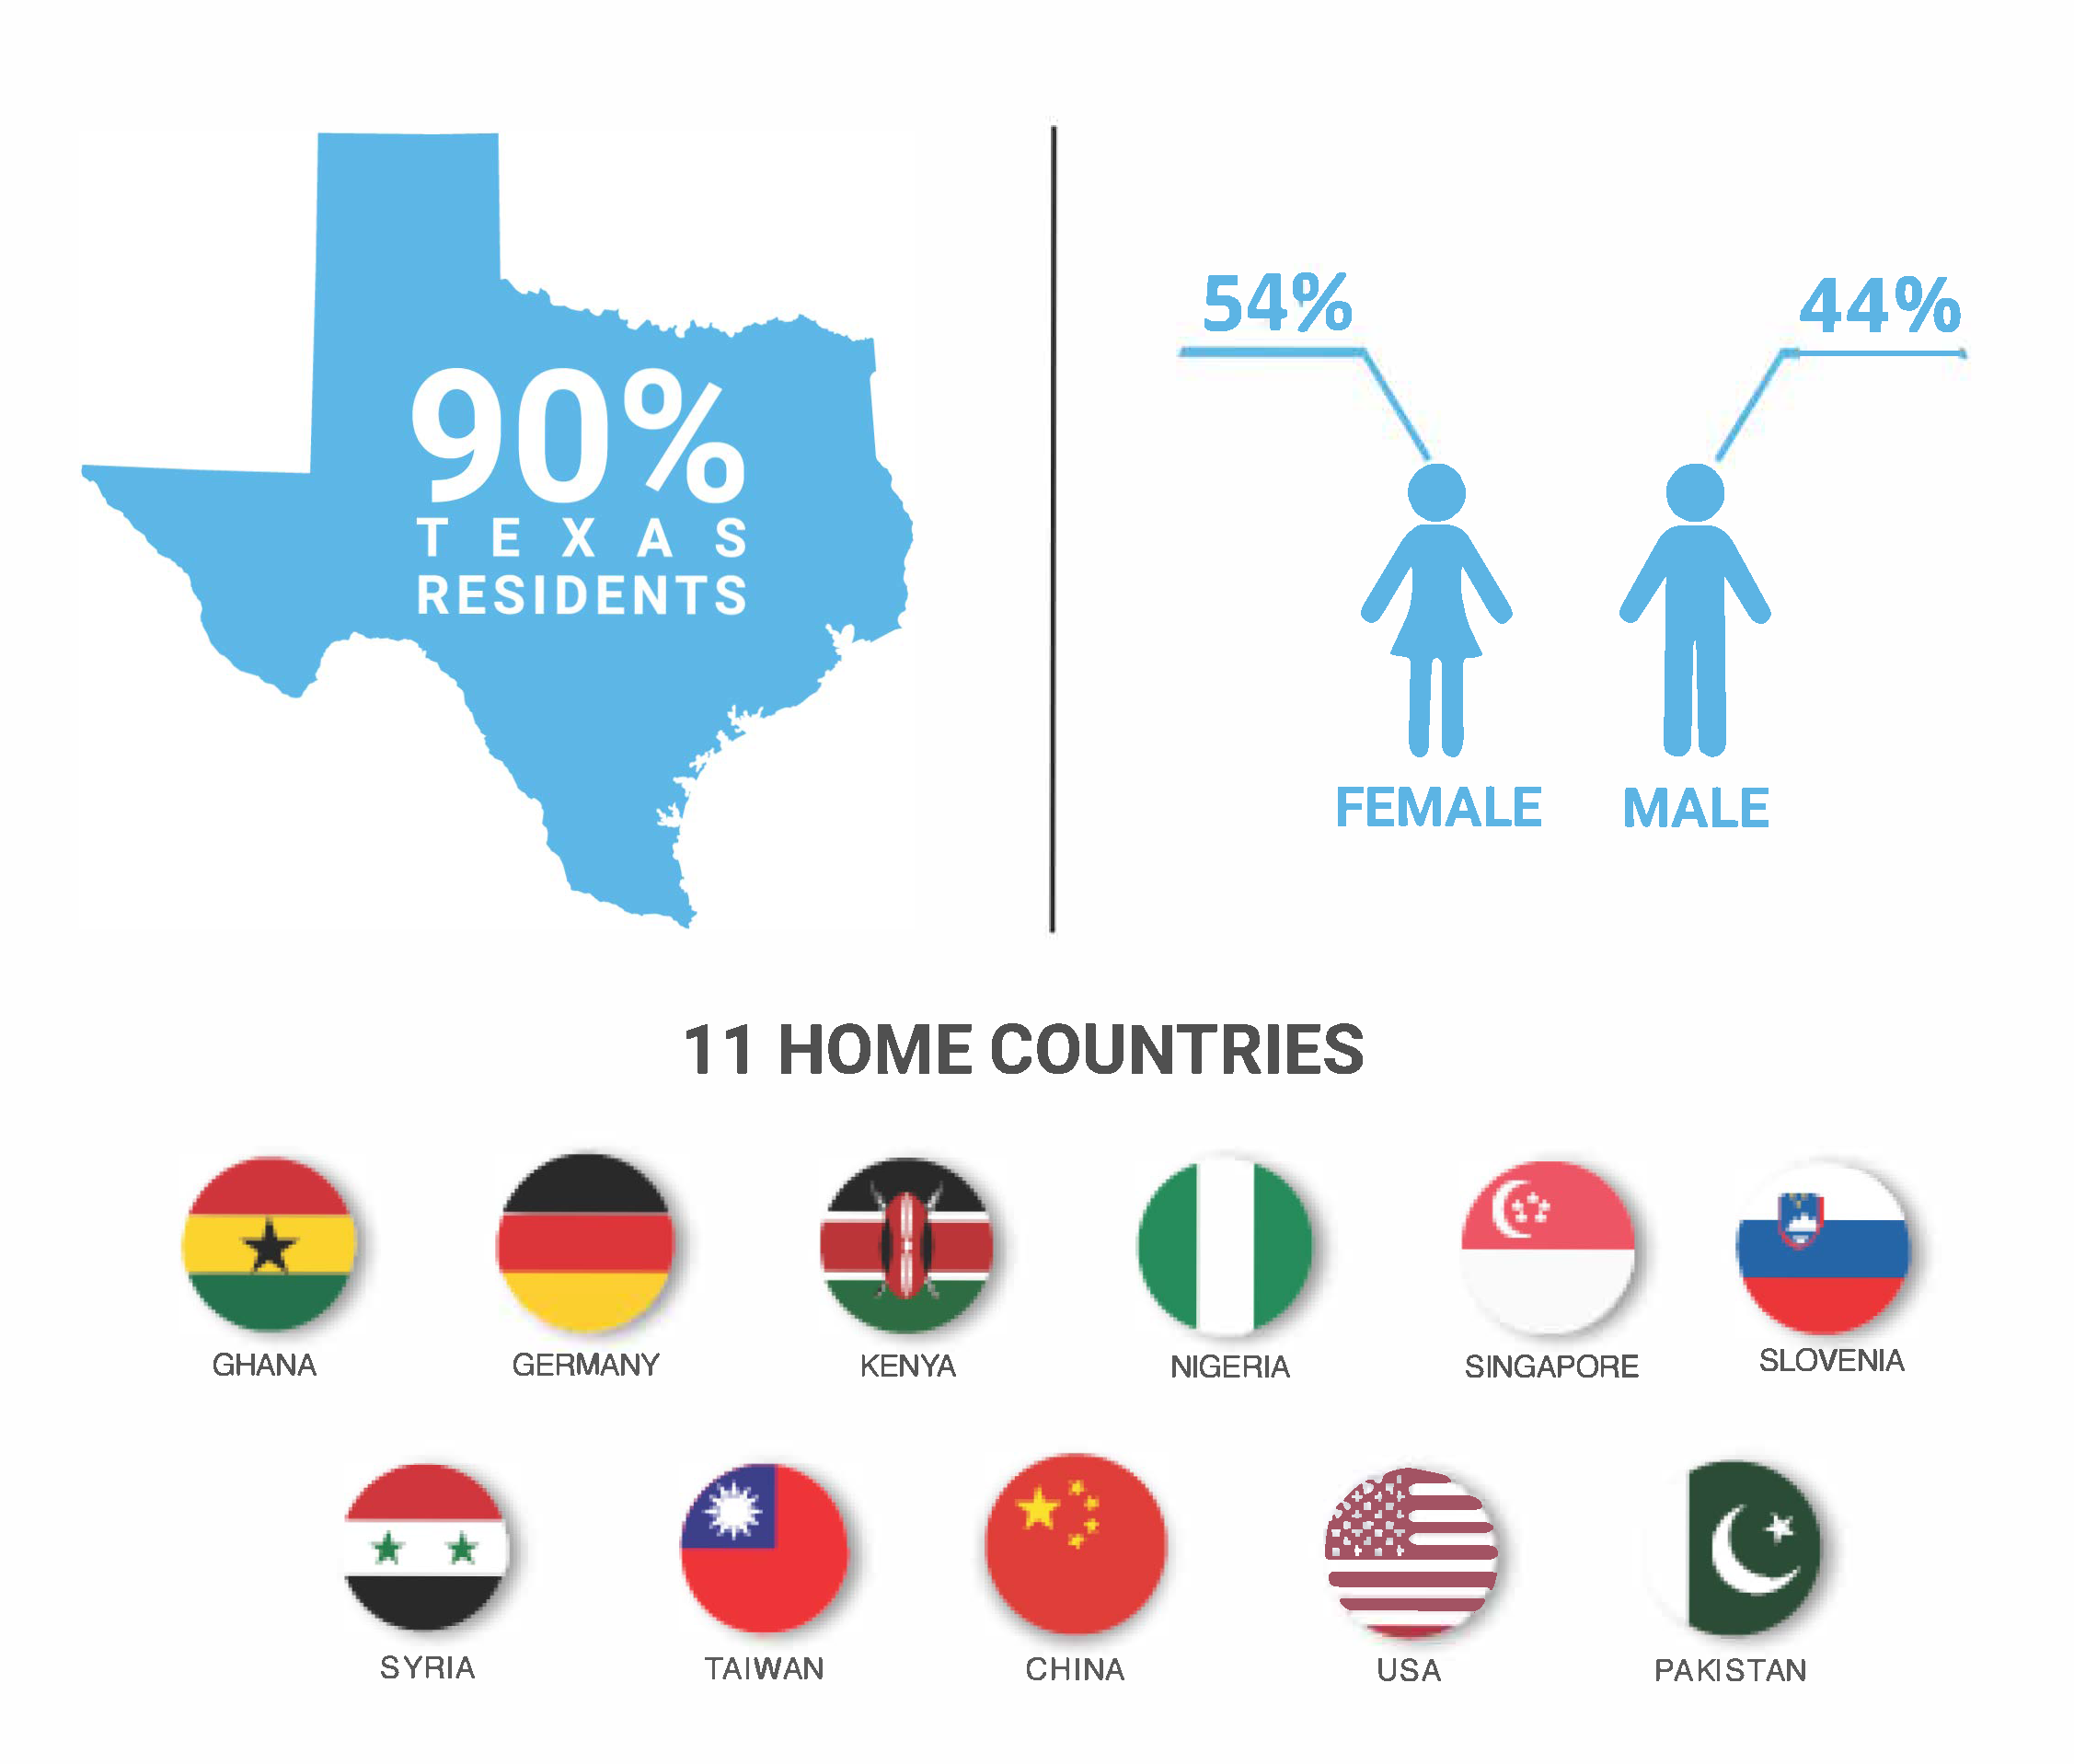 Demographics of the Class of 2025 includes 90% from Texas, 44% male, 54% female, and 11 home countries